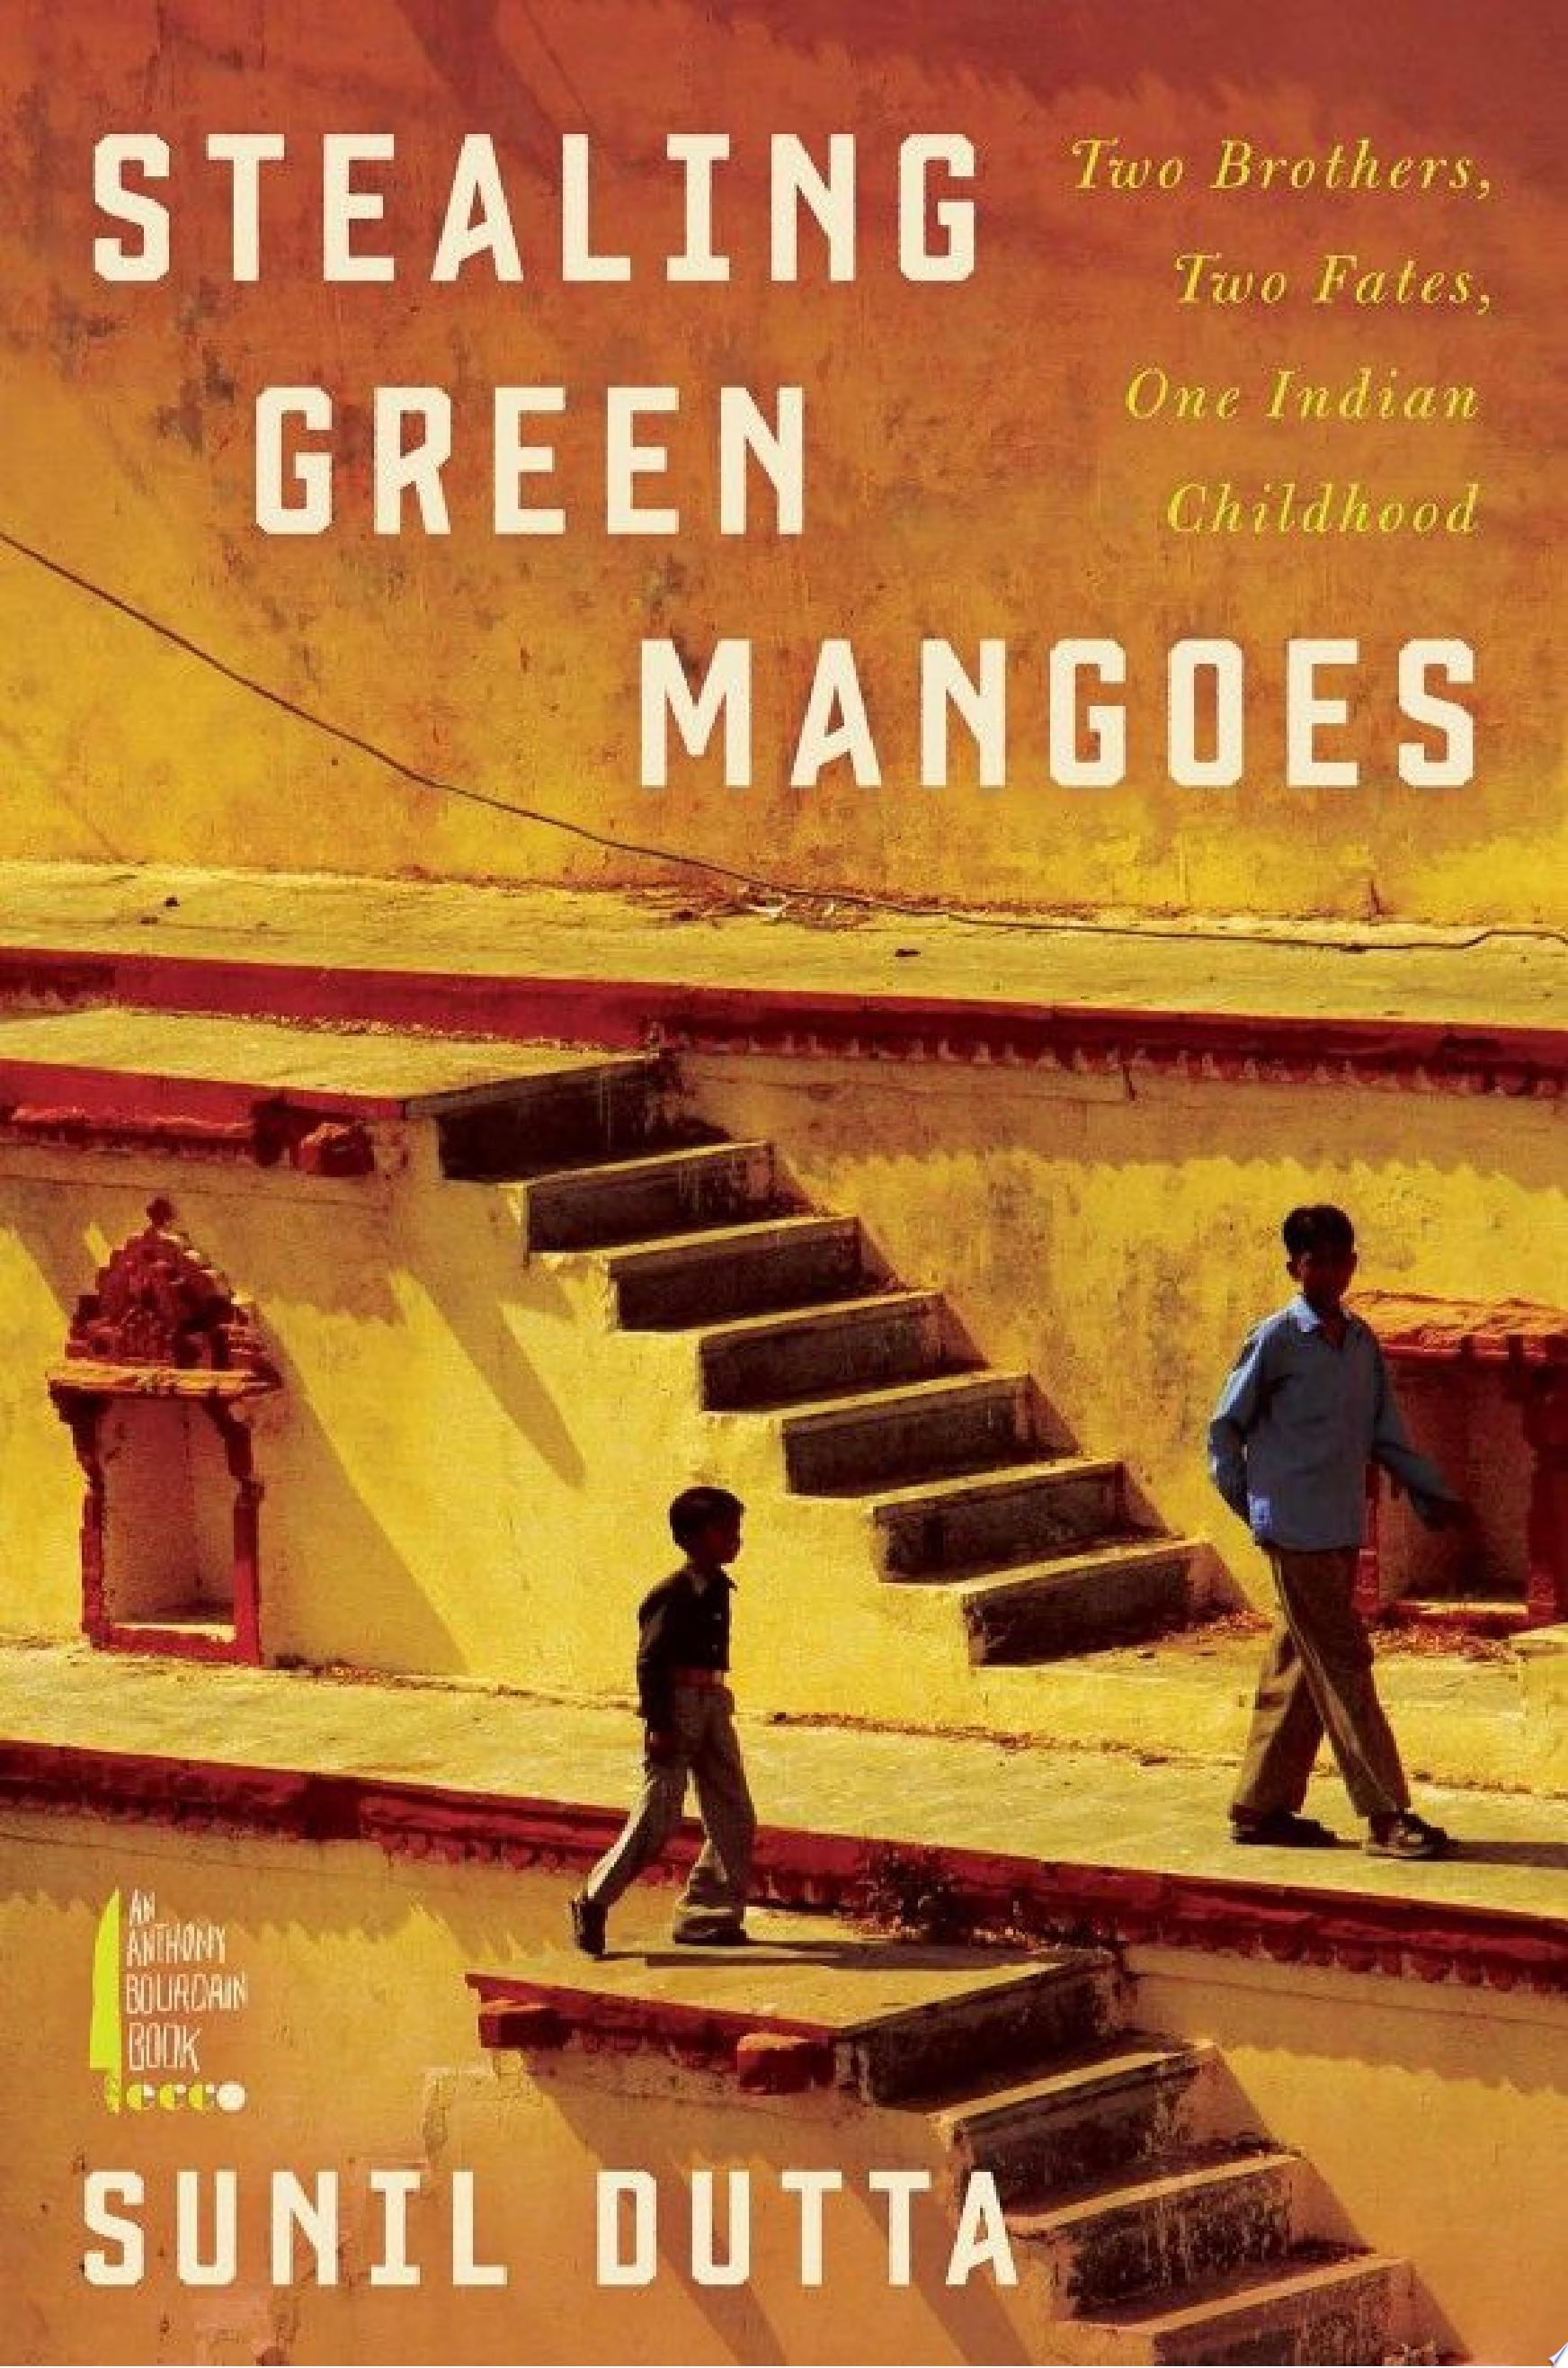 Image for "Stealing Green Mangoes"